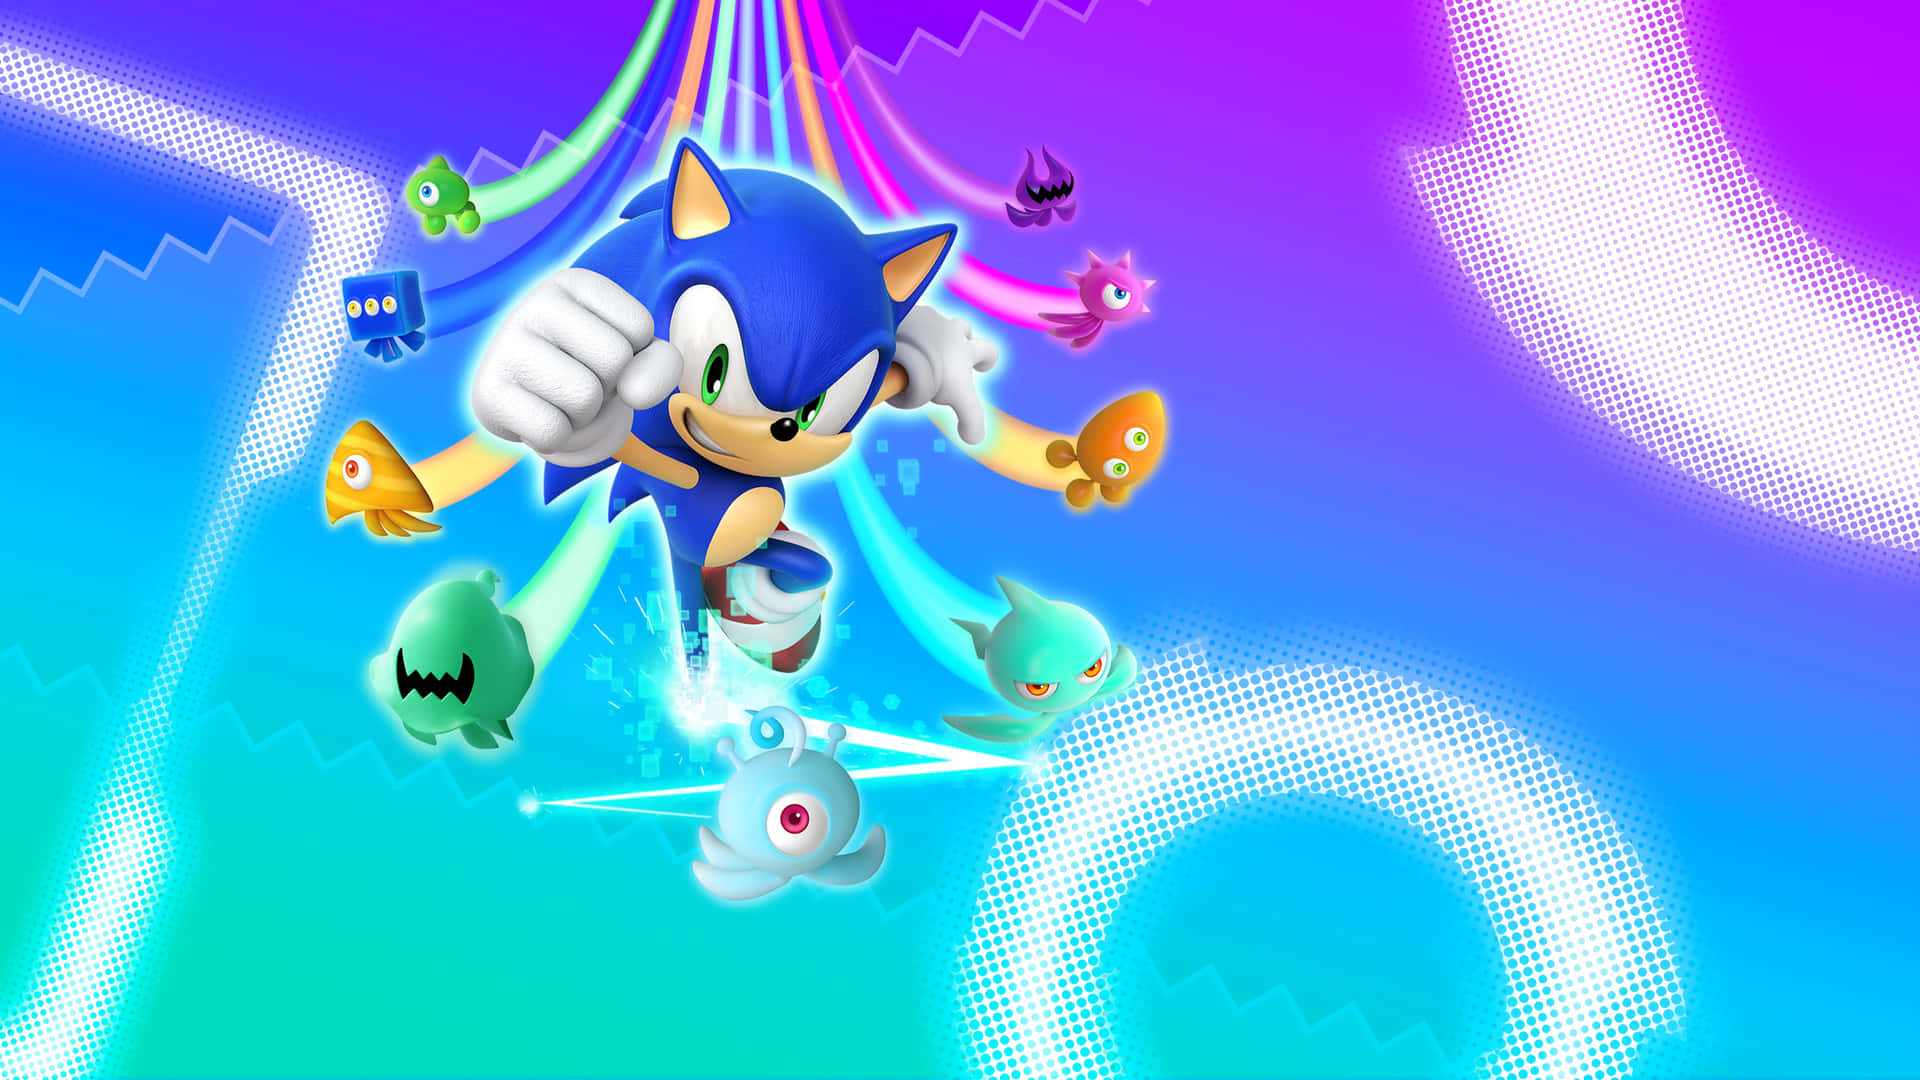 Sonic colorfully races through the sky in Sonic Colors Wallpaper